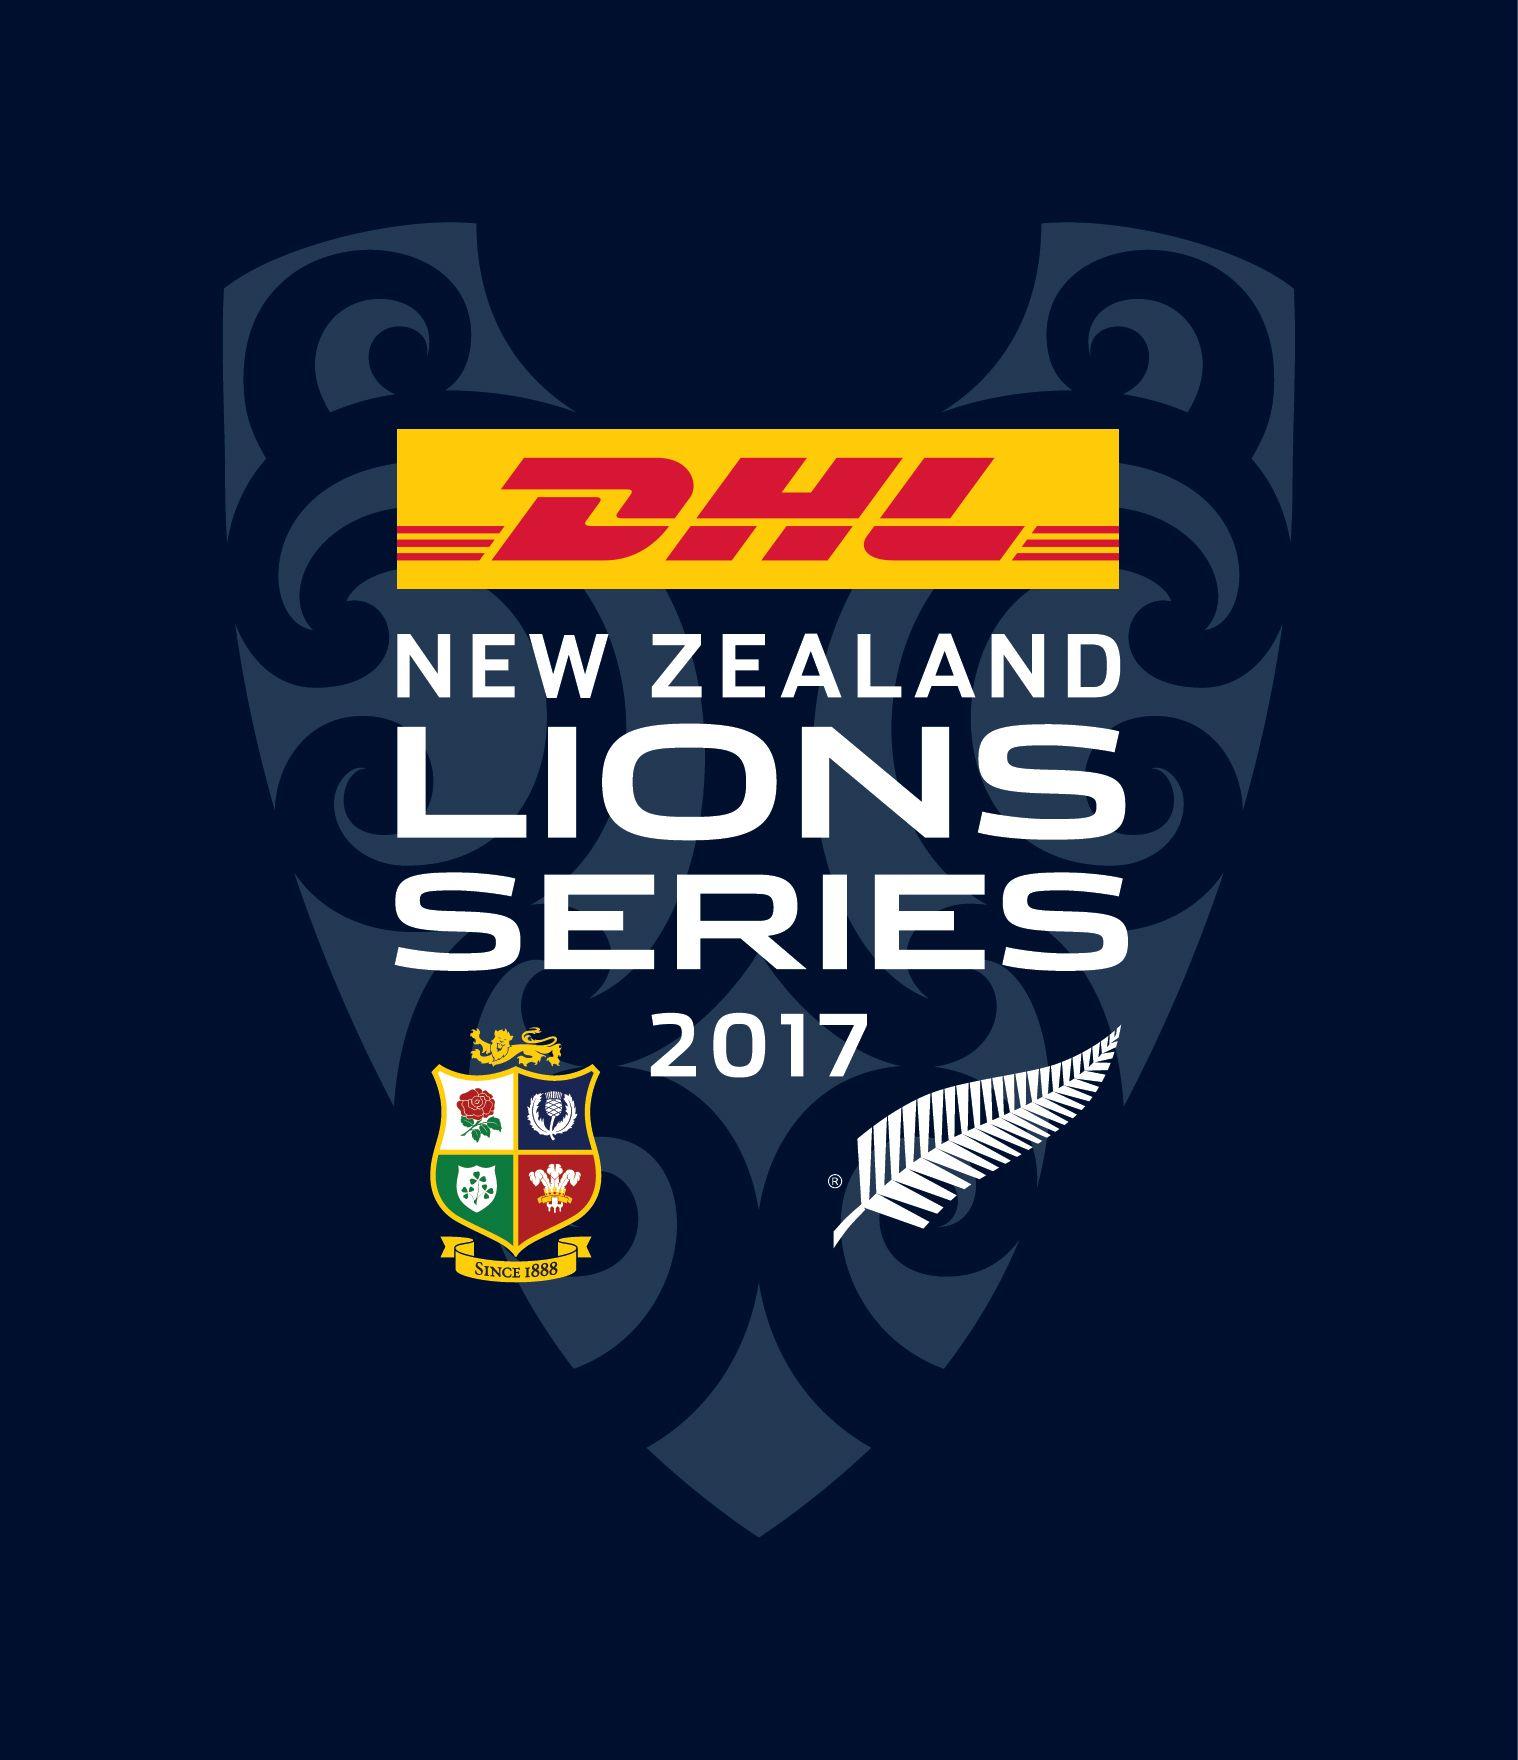 DHL New Logo - Delivering the DHL New Zealand Lions Series 2017